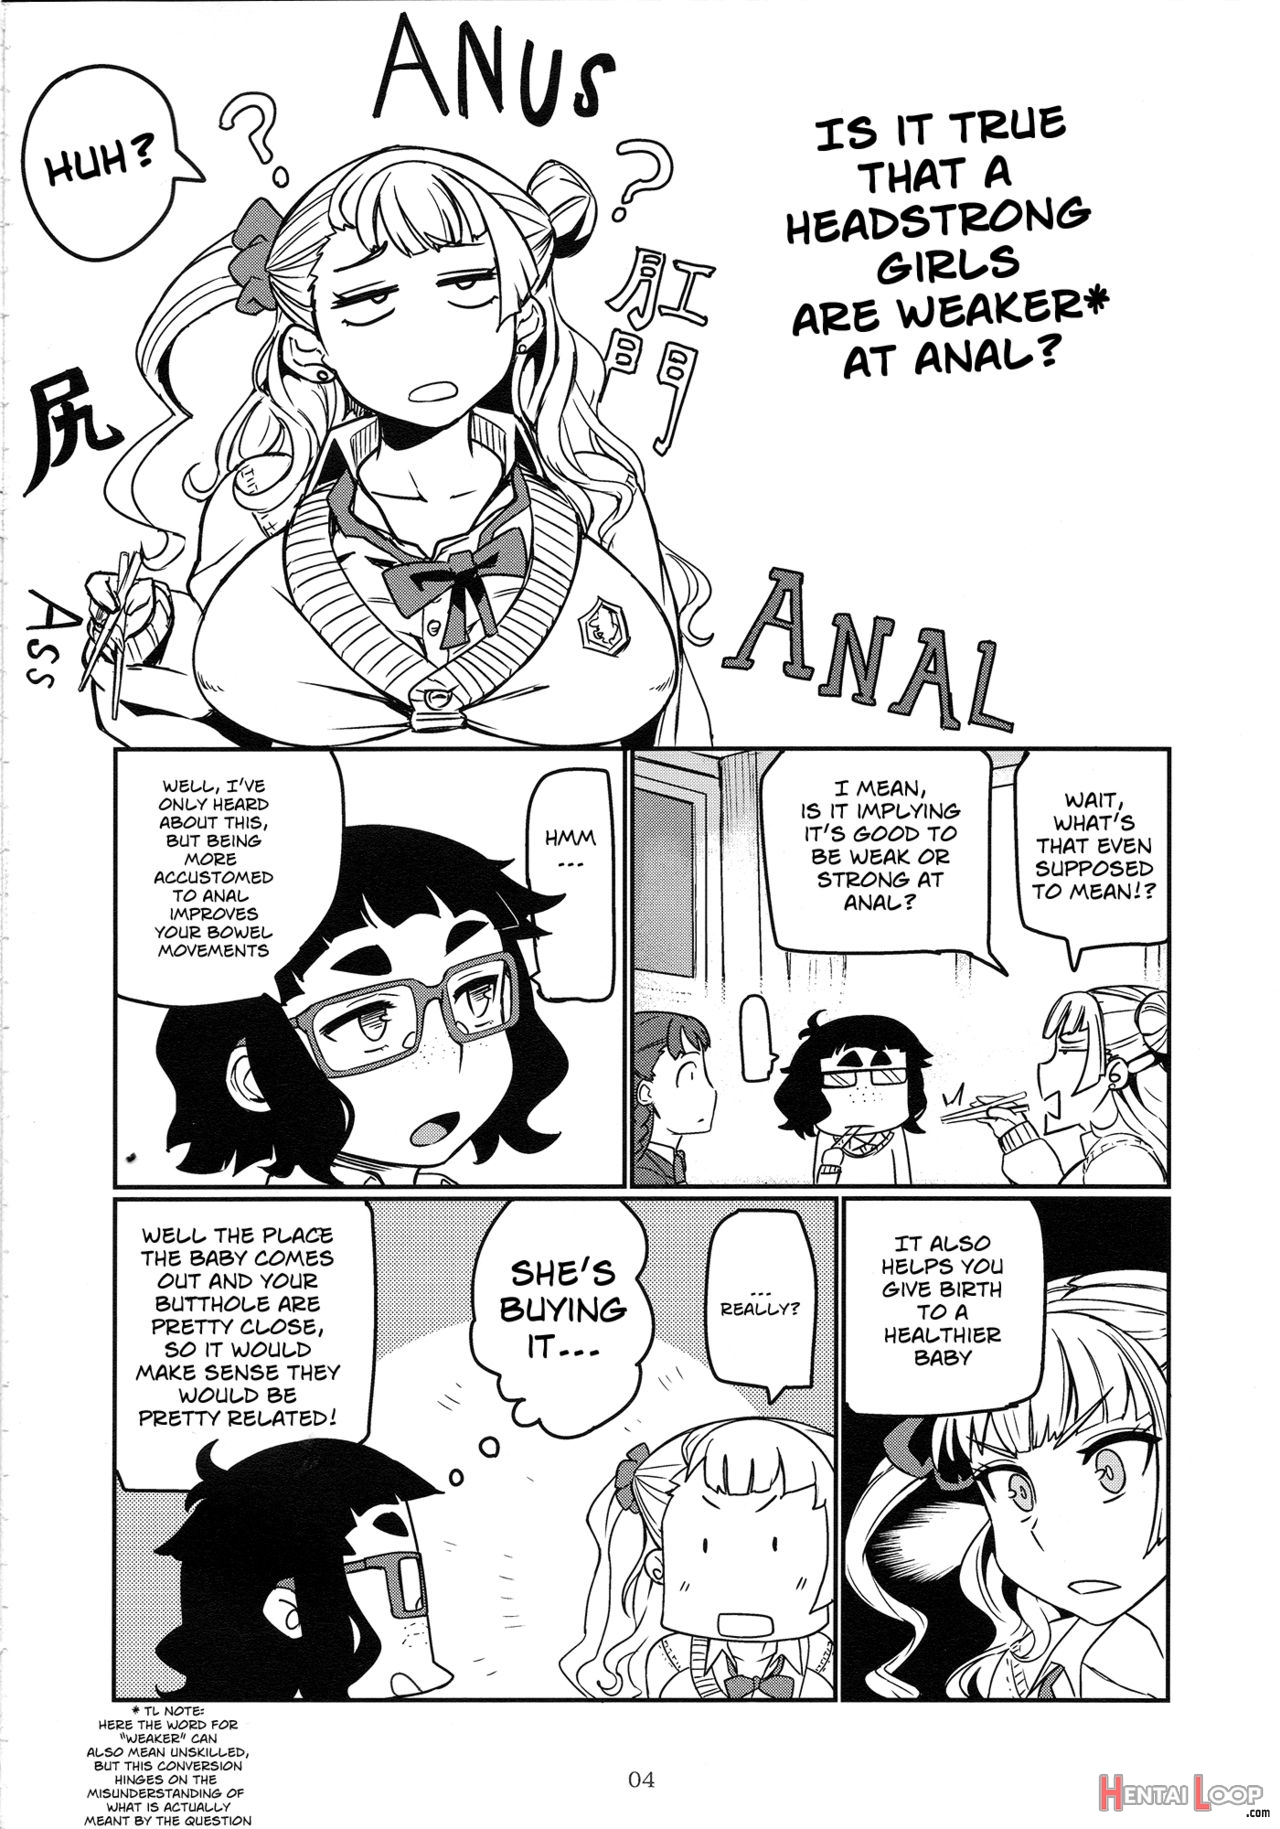 Galko Ah! page 3